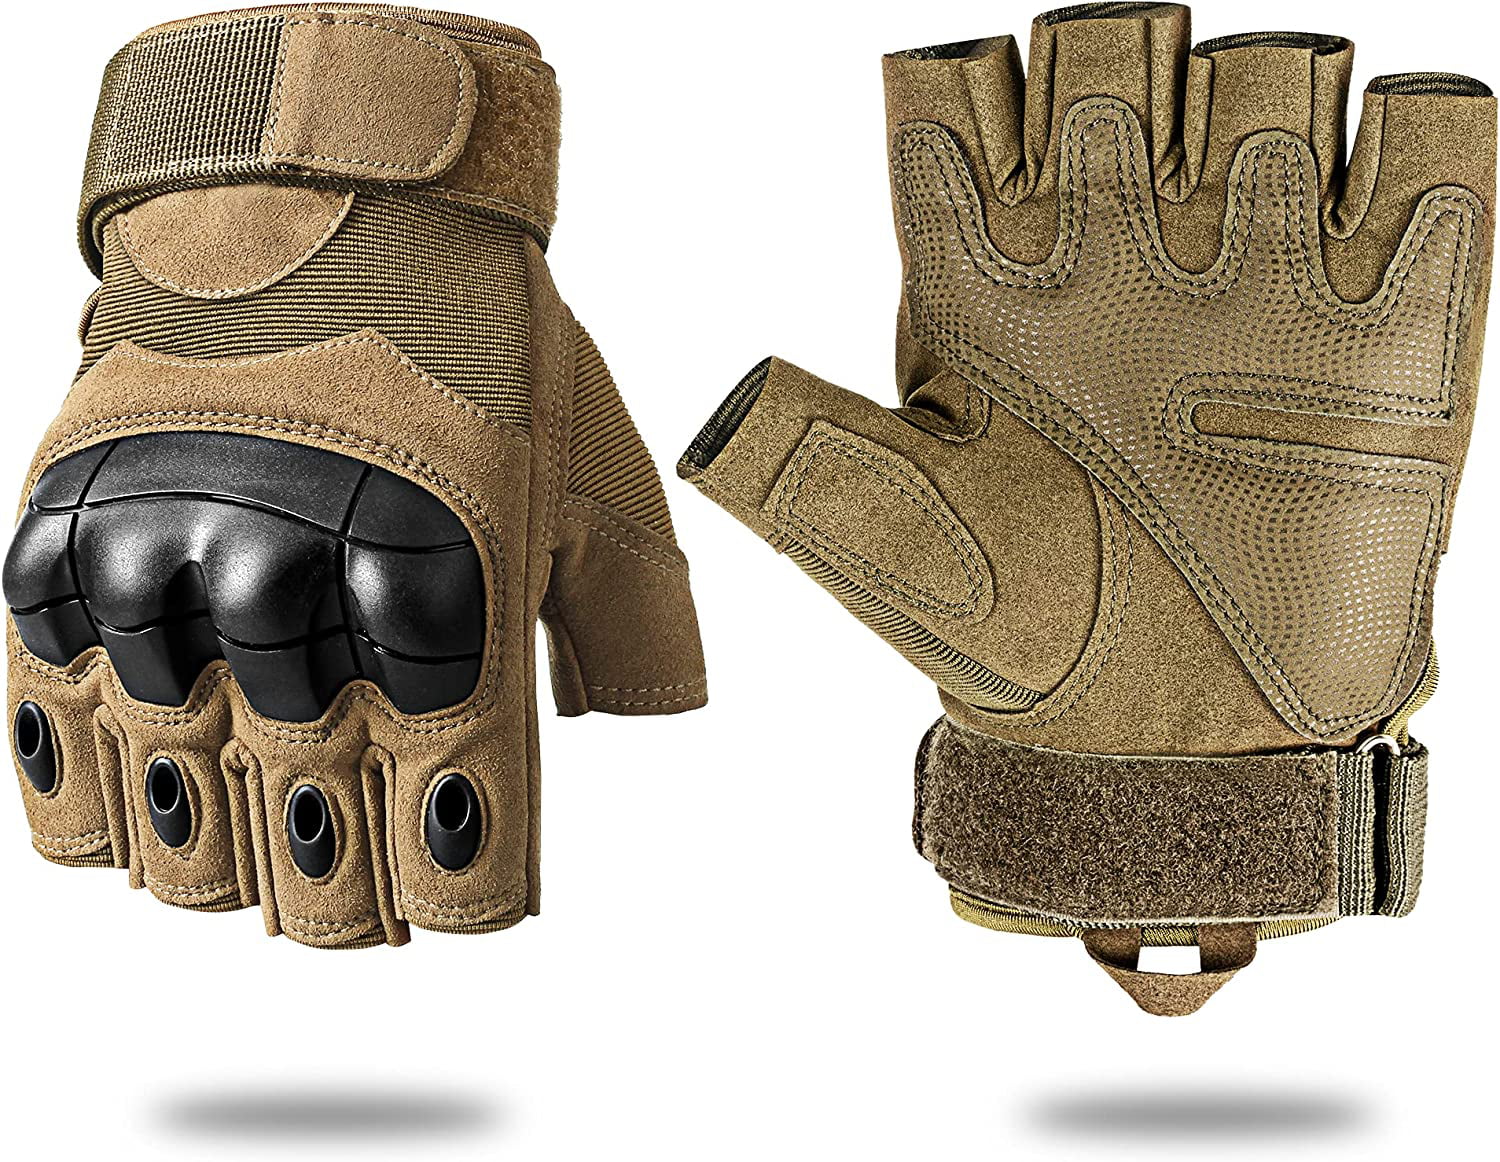 Tactical Gloves, Outdoor Gloves Fingerless Glove for Riding, Cycling,  Paintball, Motorcycle, Driving Gloves,black,Large 